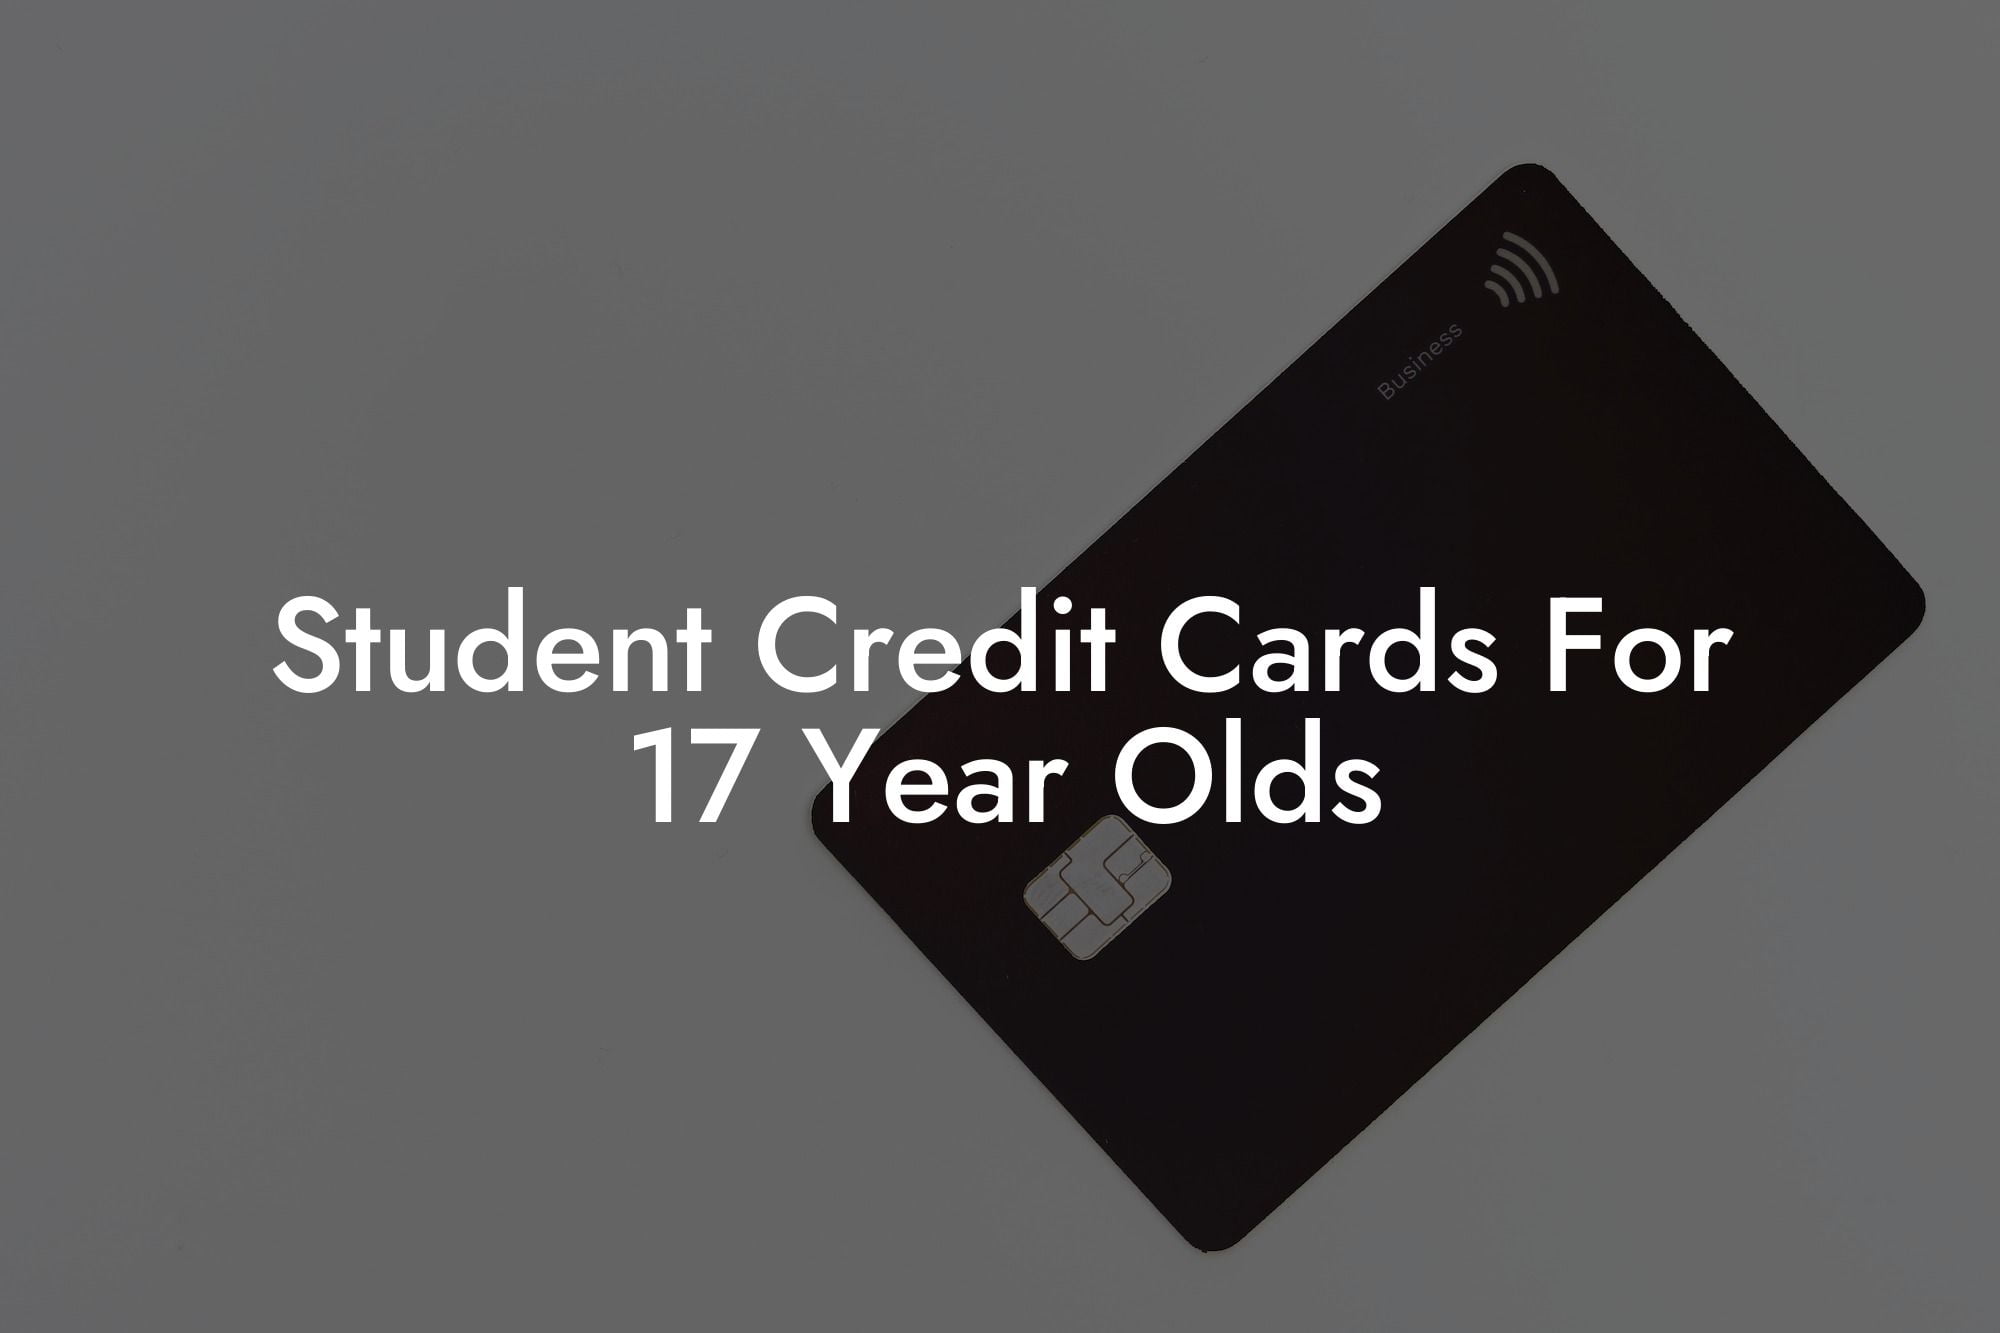 Student Credit Cards For 17 Year Olds